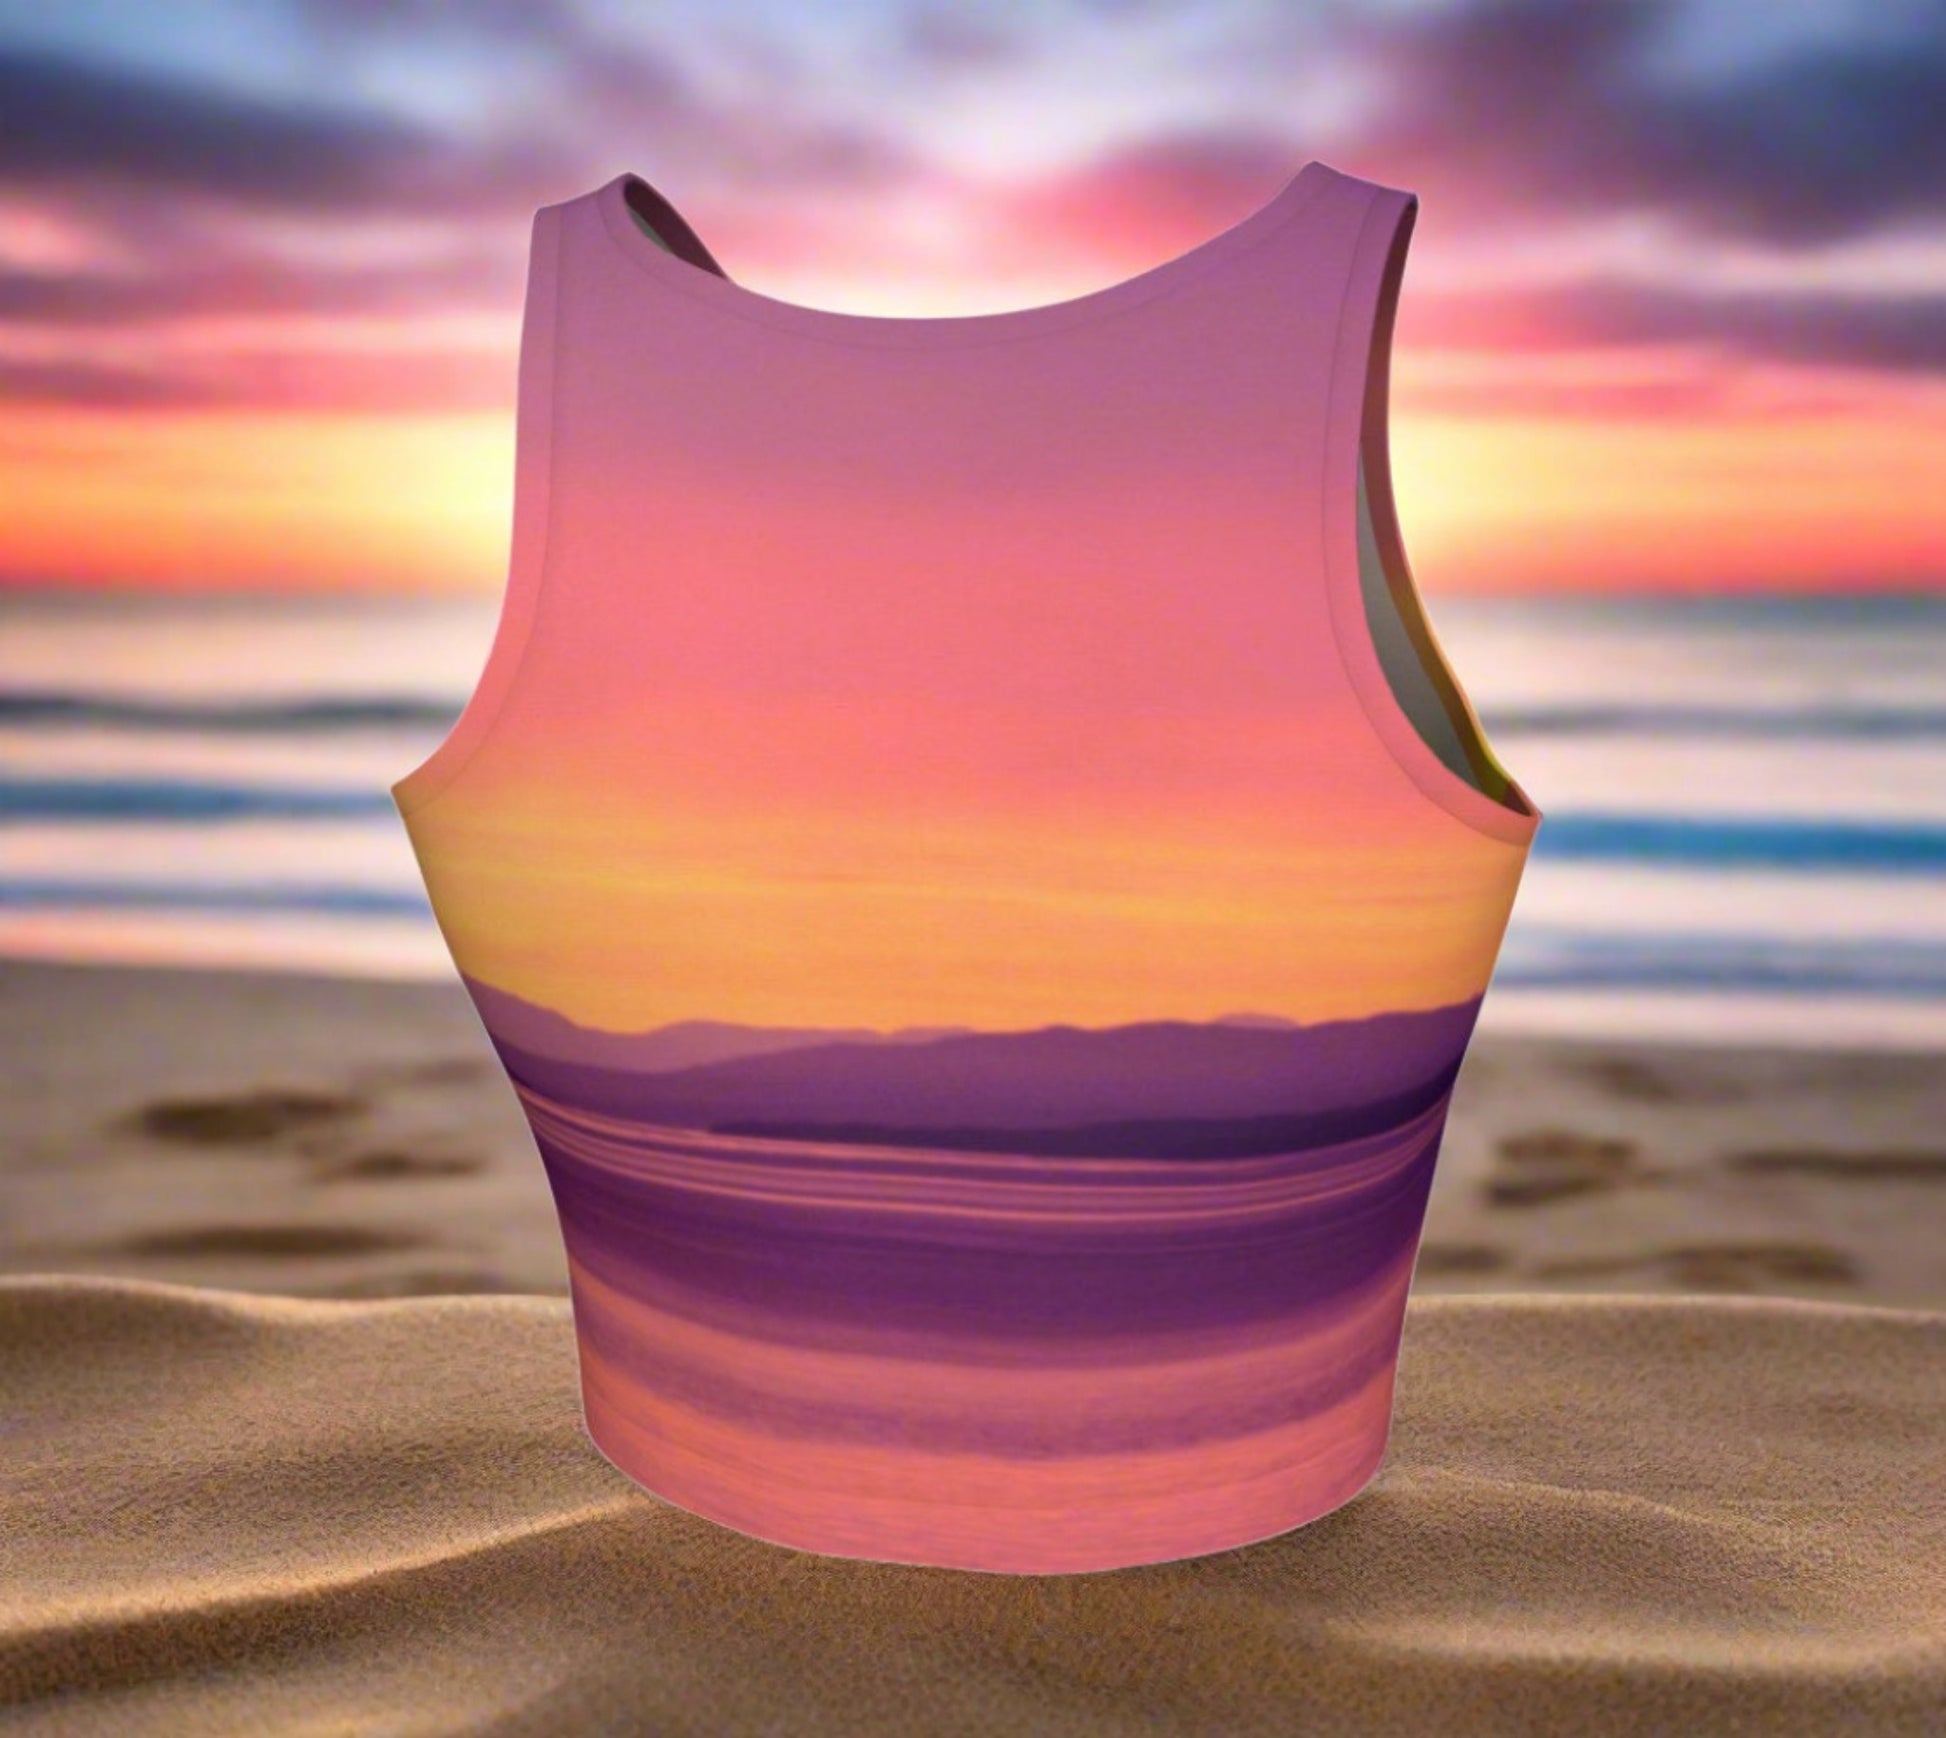 Vancouver Island Sunset Athletic Crop Top  Vancouver Island Sunset artwork by Roxy Hurtubise  Made to move with you!  Wear for your daily workouts, yoga, beach volleyball or as a bathing suit top!  Your Van Isle Goddess athletic crop top pairs up with our yoga or classic leggings and capris. Crop tops also look great with shorts, mini shorts, skirts fitted or flared.